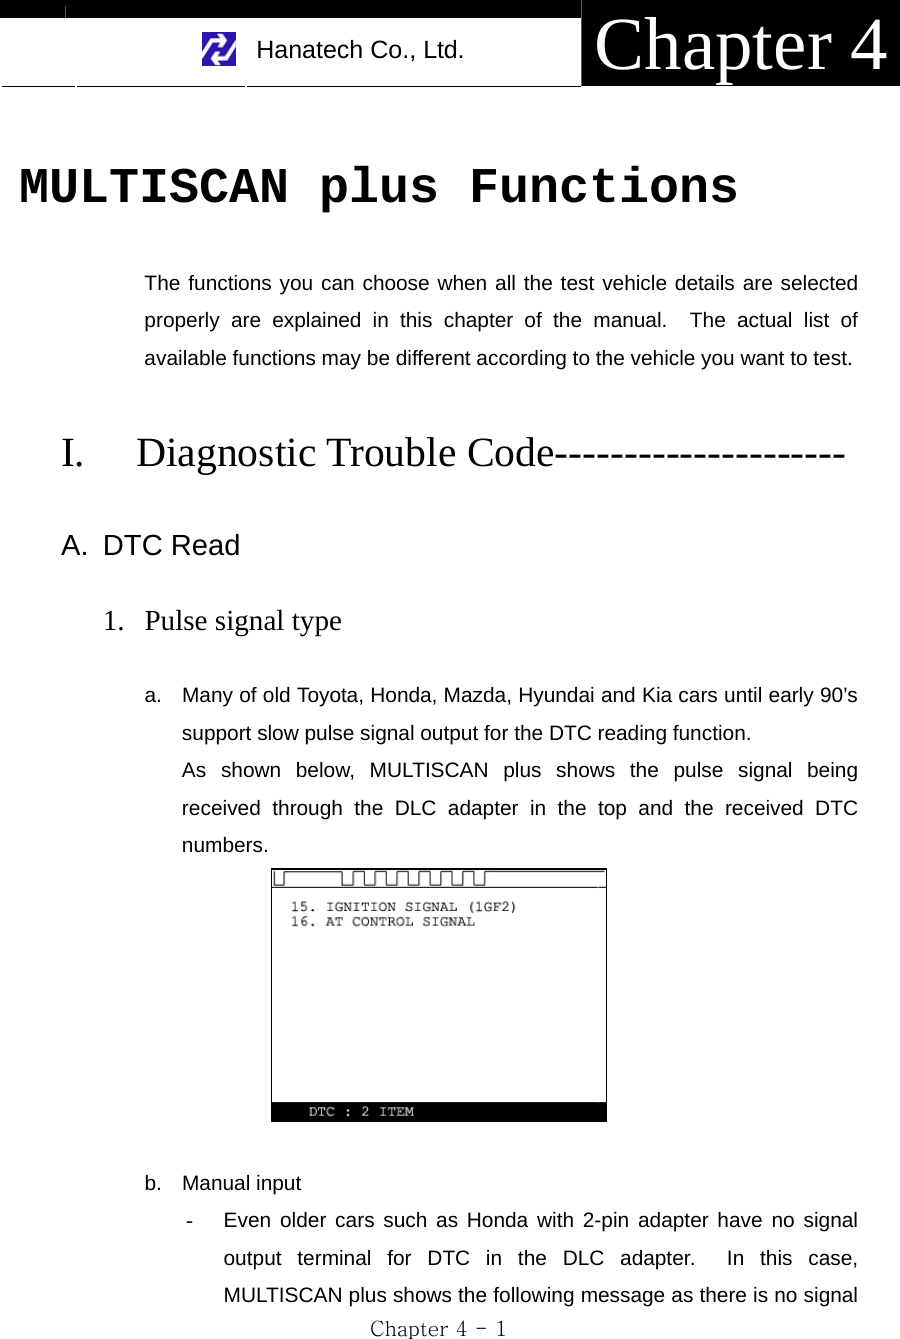     Hanatech Co., Ltd.  Chapter 4 Chapter 4 - 1  MULTISCAN plus Functions  The functions you can choose when all the test vehicle details are selected properly are explained in this chapter of the manual.  The actual list of available functions may be different according to the vehicle you want to test.    I. Diagnostic Trouble Code---------------------  A. DTC Read  1. Pulse signal type  a.  Many of old Toyota, Honda, Mazda, Hyundai and Kia cars until early 90’s support slow pulse signal output for the DTC reading function. As shown below, MULTISCAN plus shows the pulse signal being received through the DLC adapter in the top and the received DTC numbers.   b. Manual input -  Even older cars such as Honda with 2-pin adapter have no signal output terminal for DTC in the DLC adapter.  In this case, MULTISCAN plus shows the following message as there is no signal 